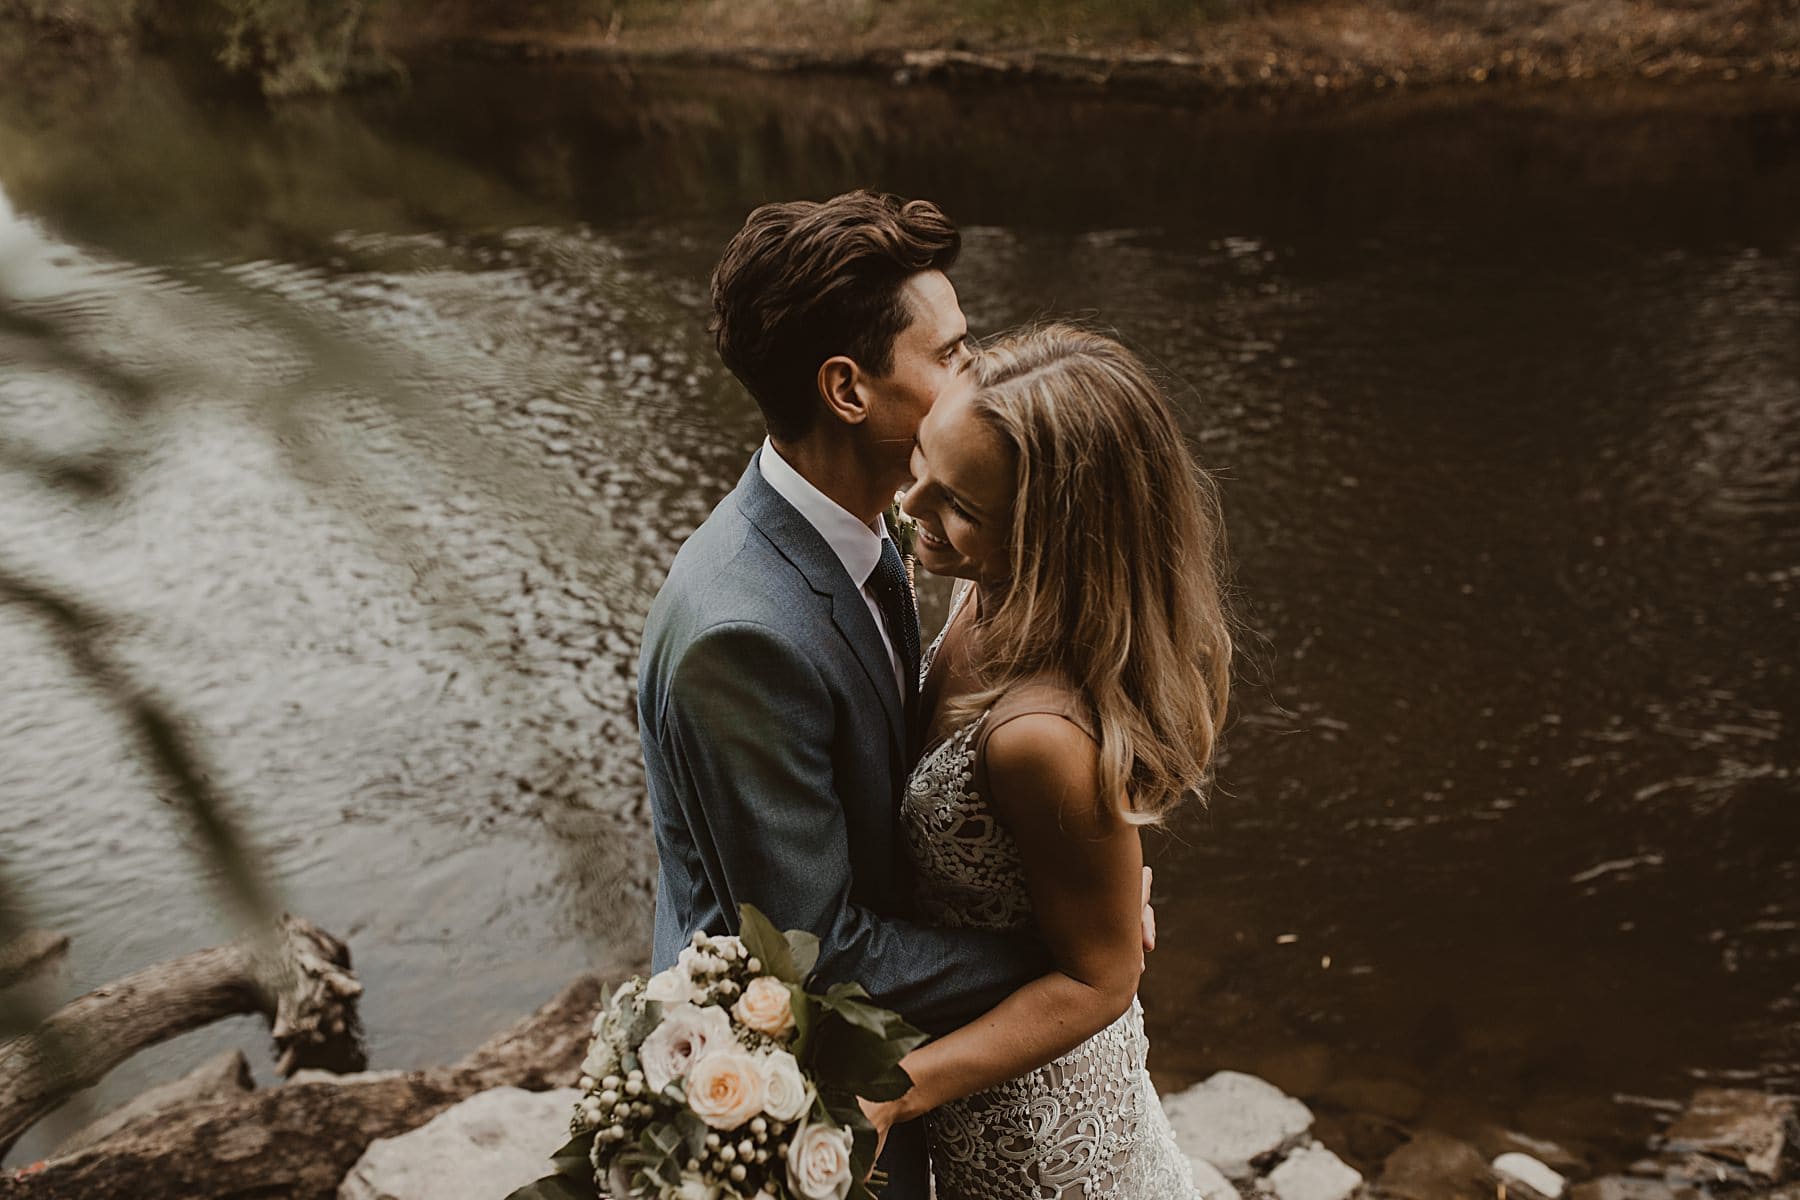 cuddling by a river - relaxed wedding photography